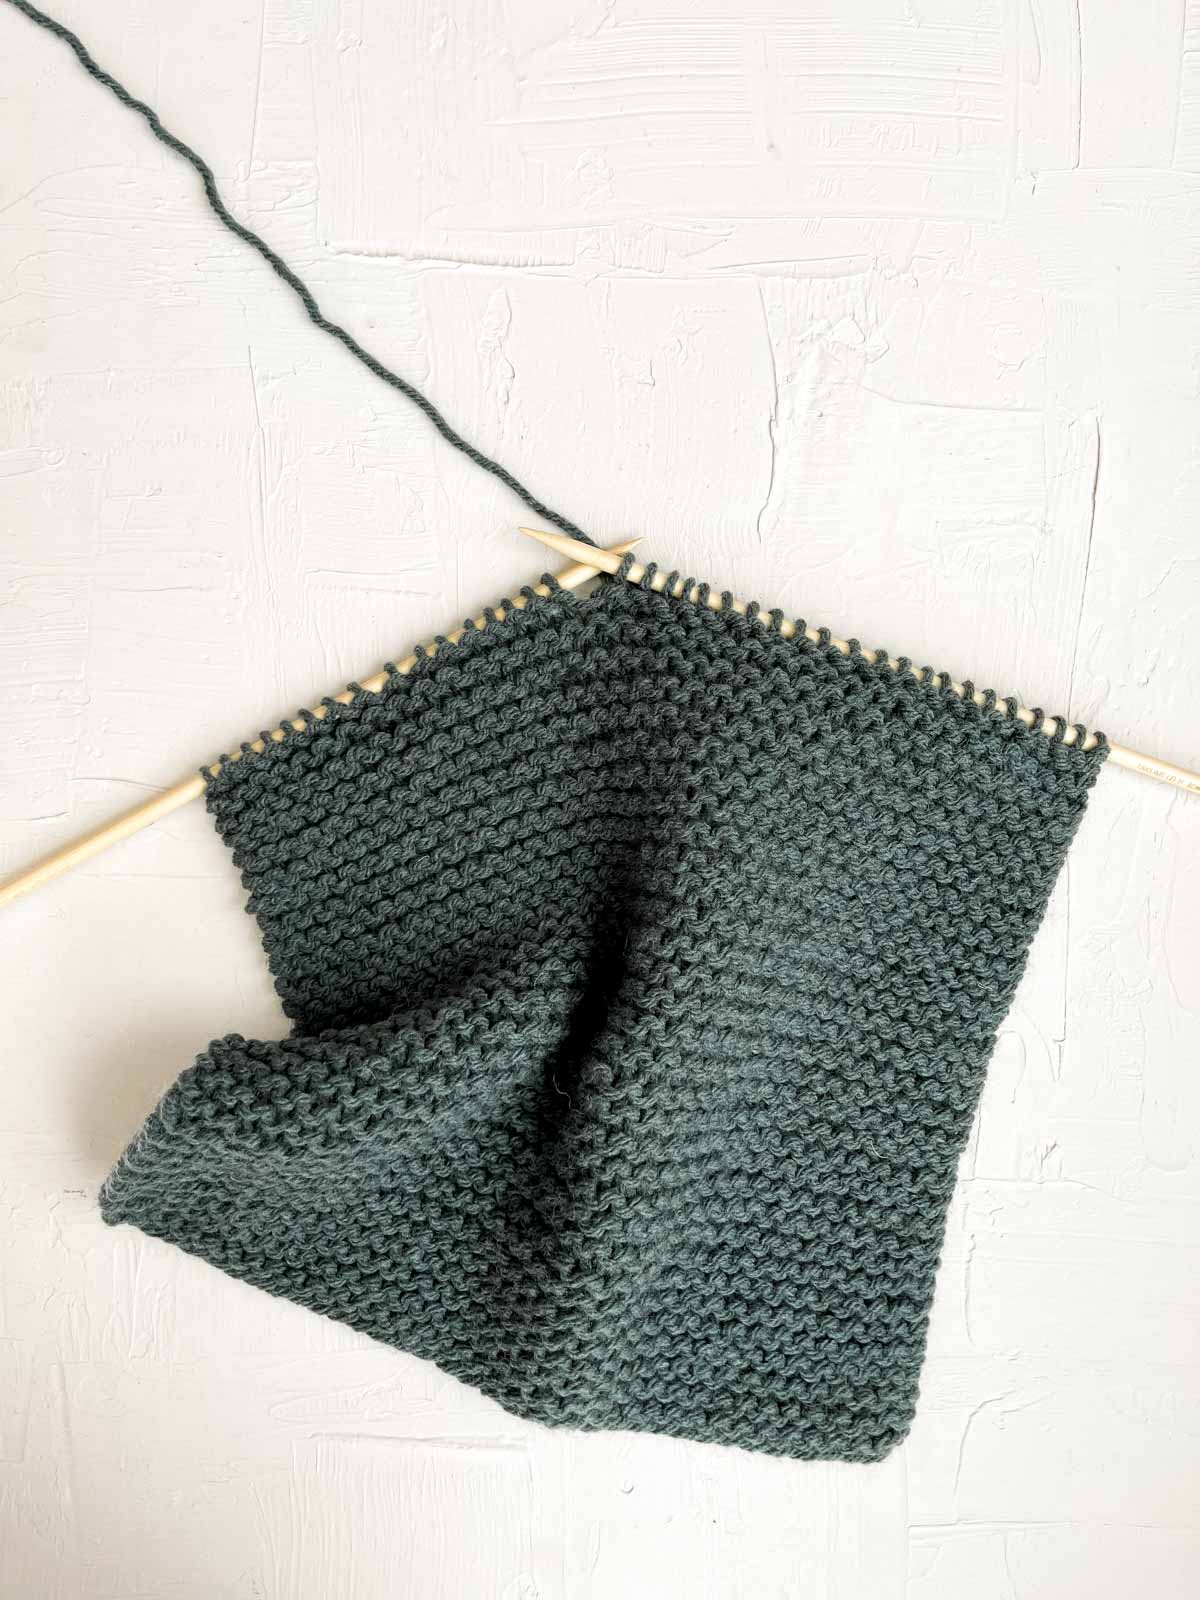 Wooden knitting needles and green yarn making the garter stitch.